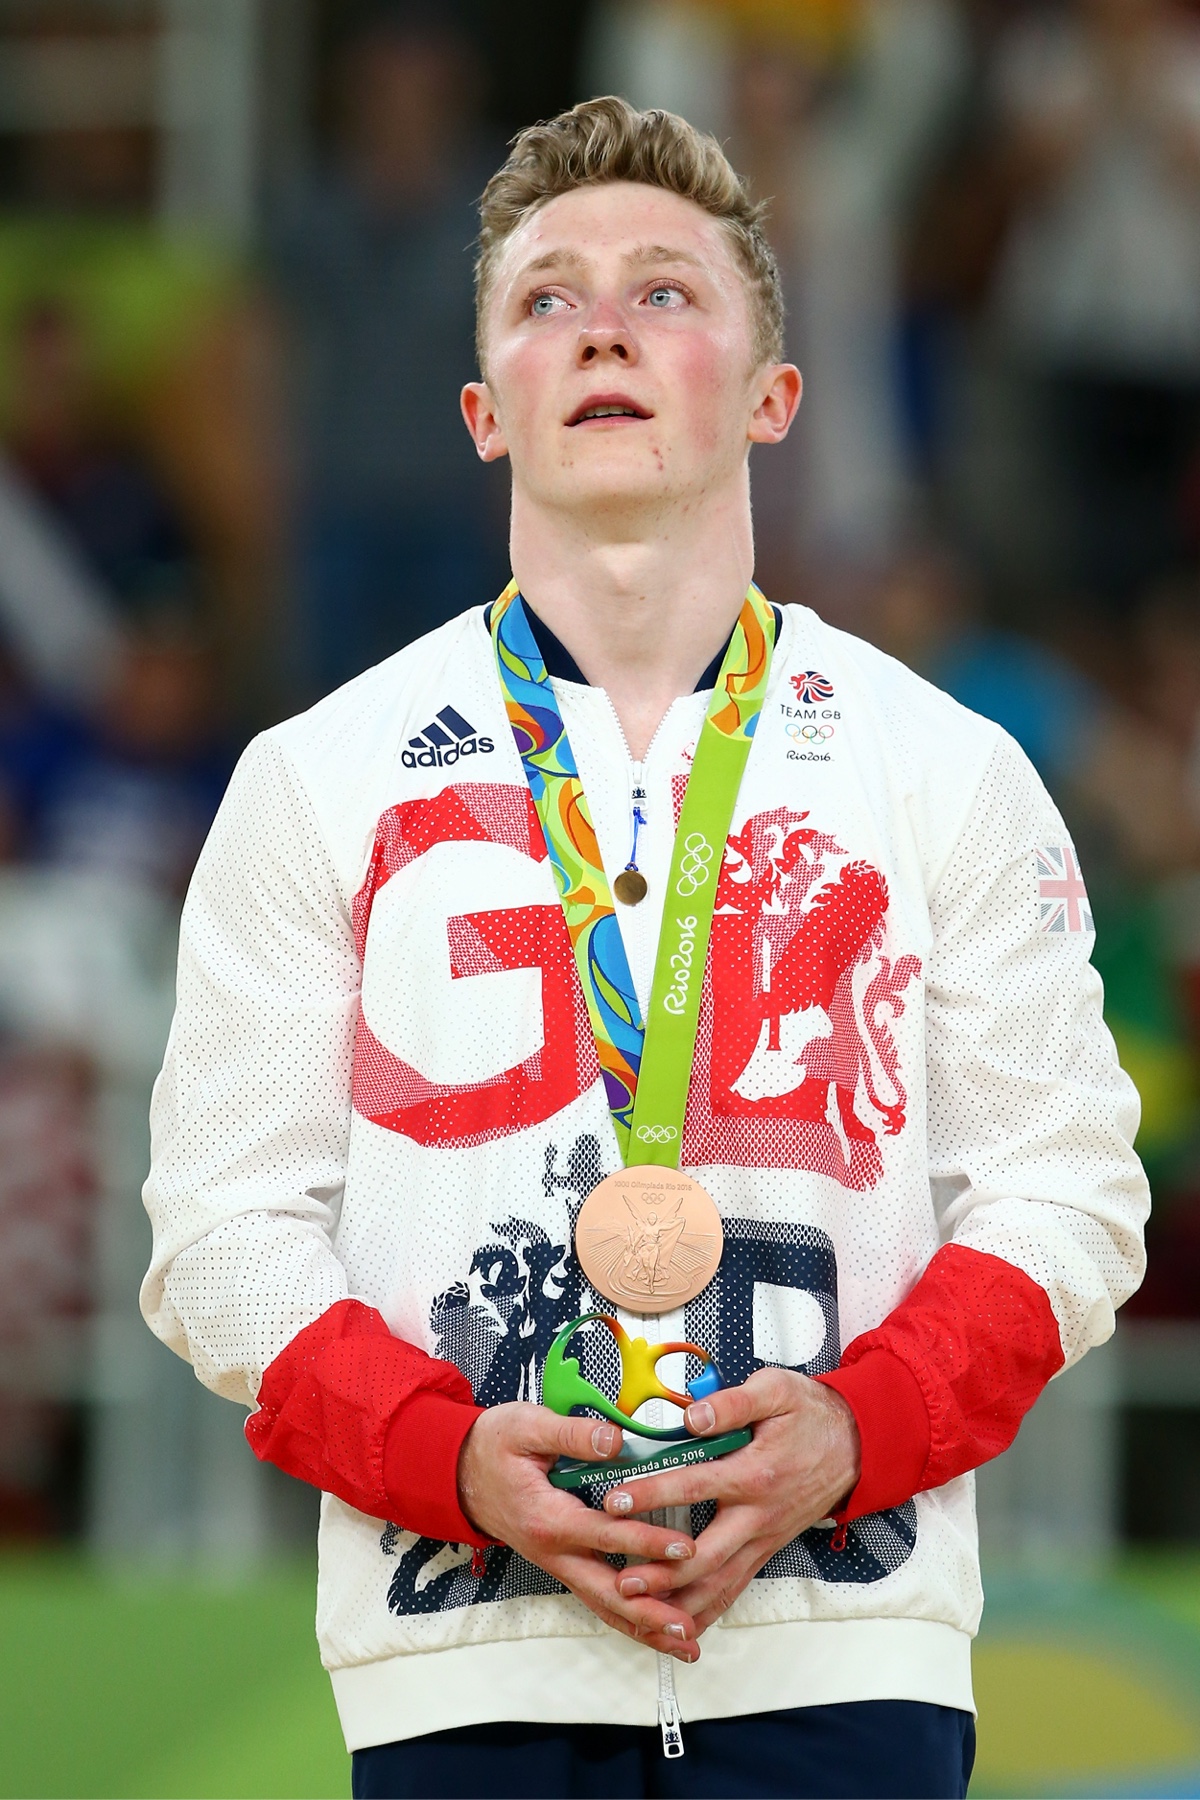 emotional Nile Wilson after winning historic Olympic bronze medal on high bar